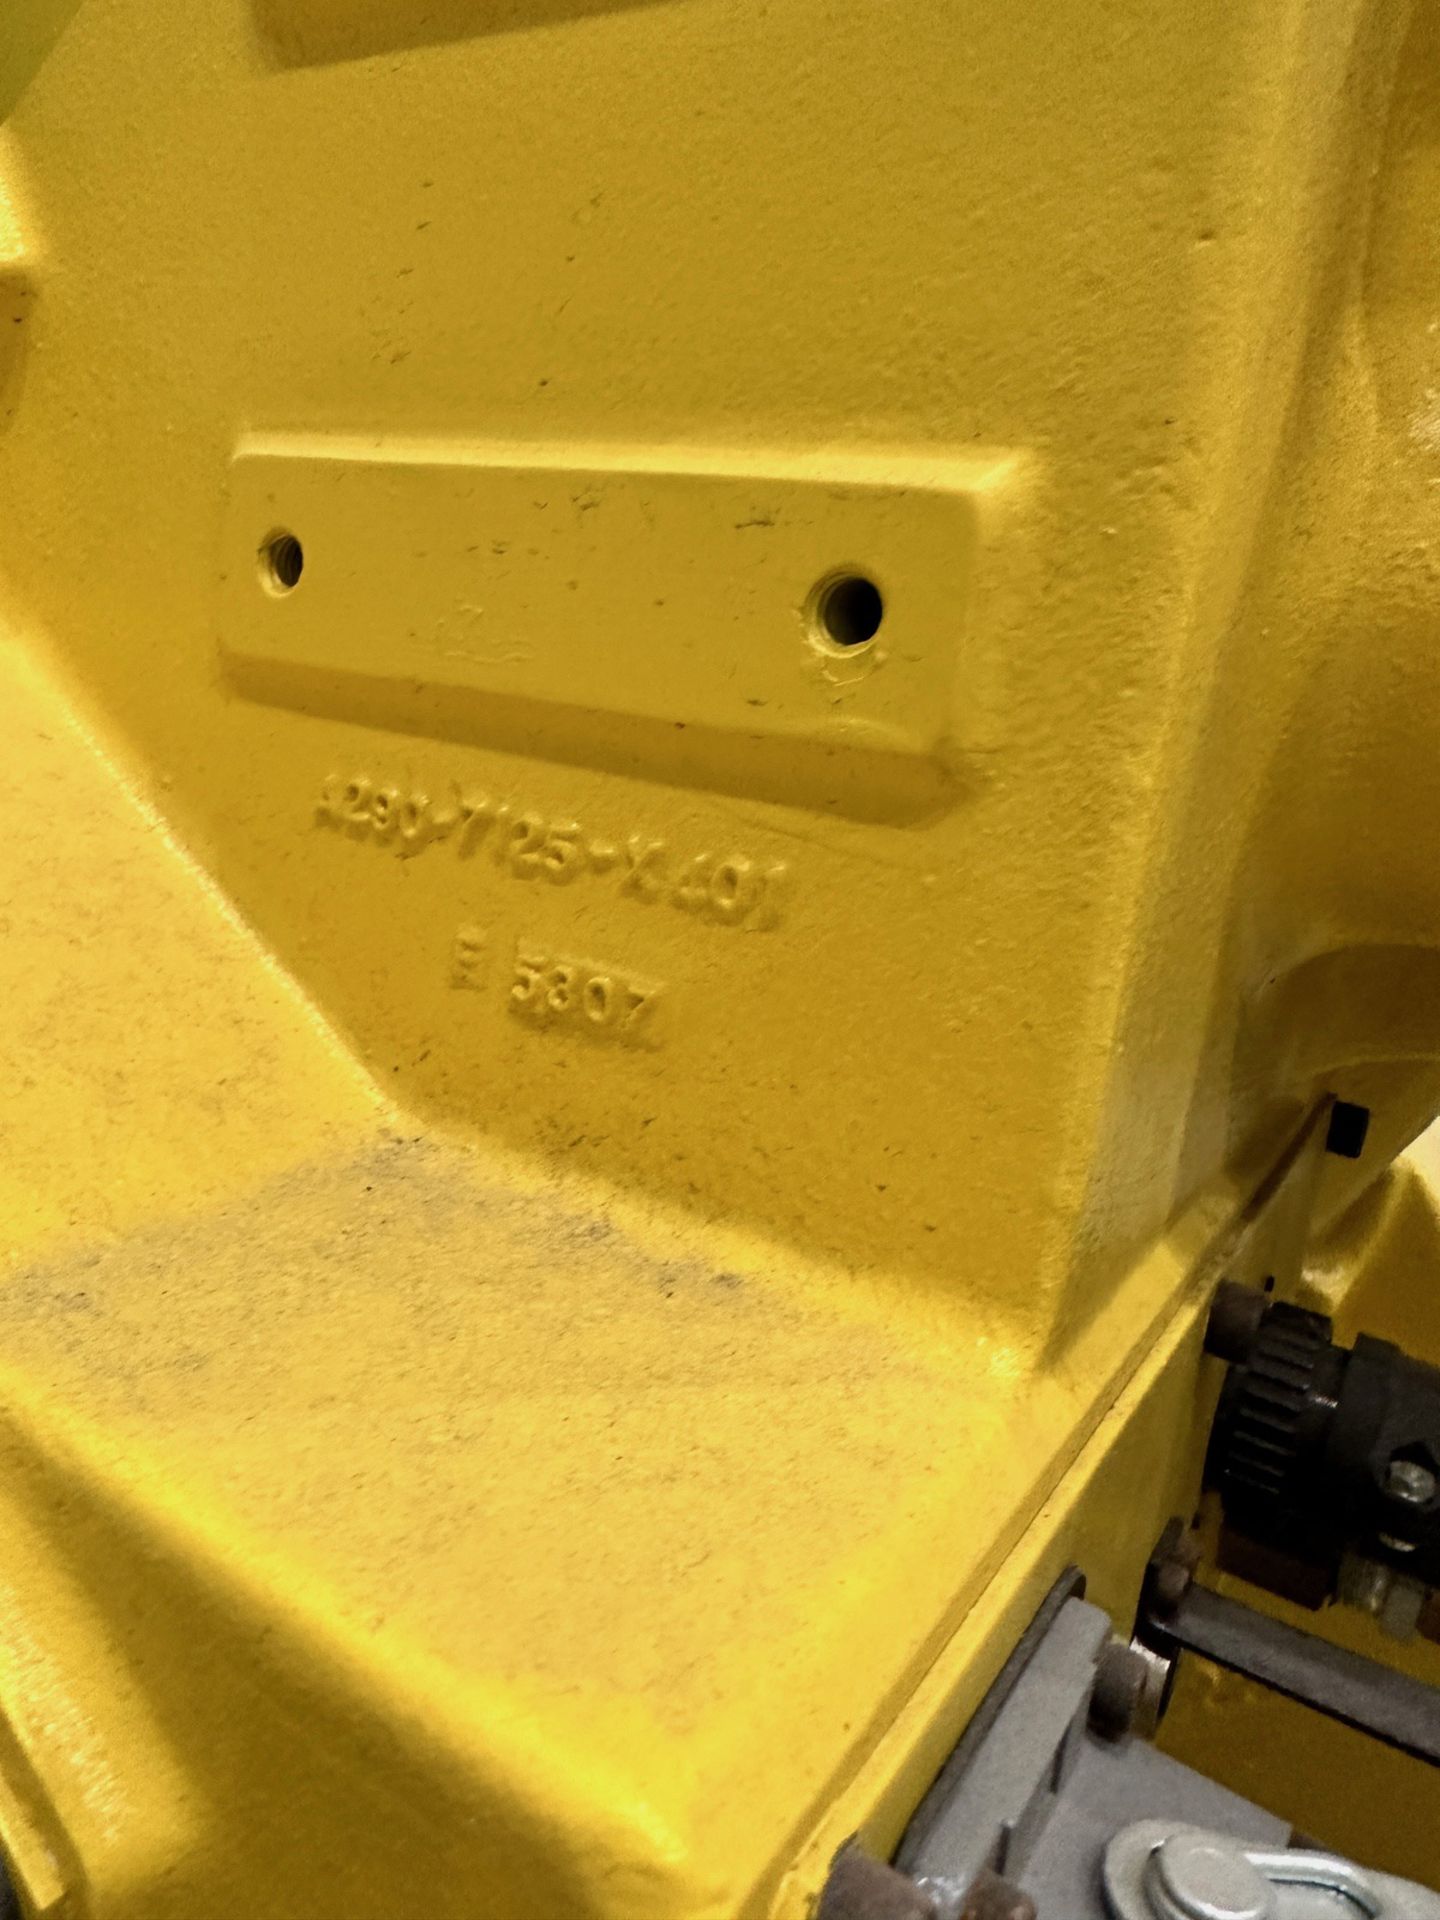 2015 Fanuc Robot M-710iC 50 Robot System, Joulin Head, Controller & Pendant (Locate | Rig Fee $150 - Image 4 of 5